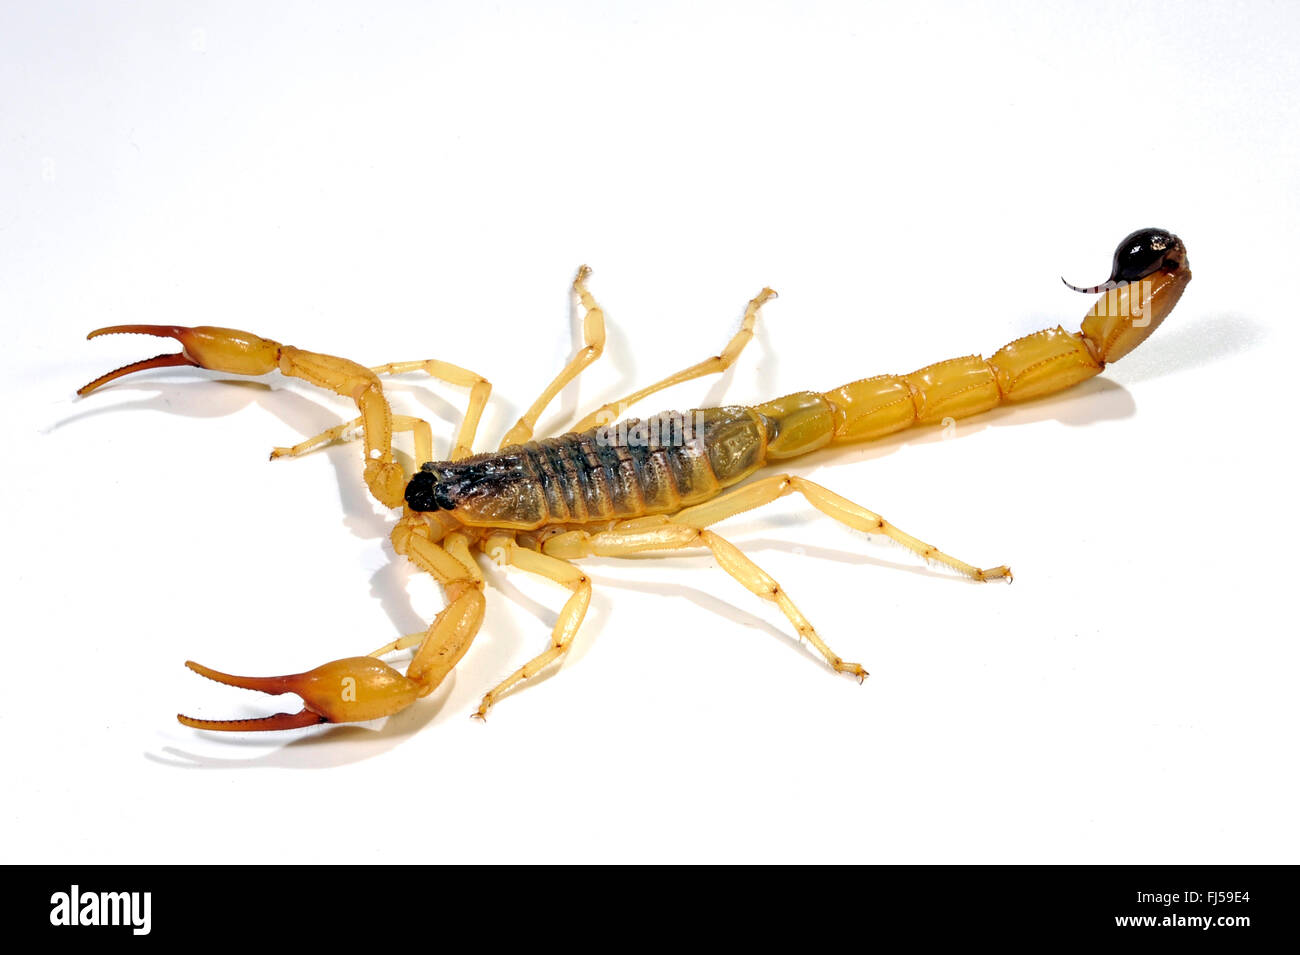 Saulcy's Scorpion  (Hottentotta saulcy), cut-out Stock Photo